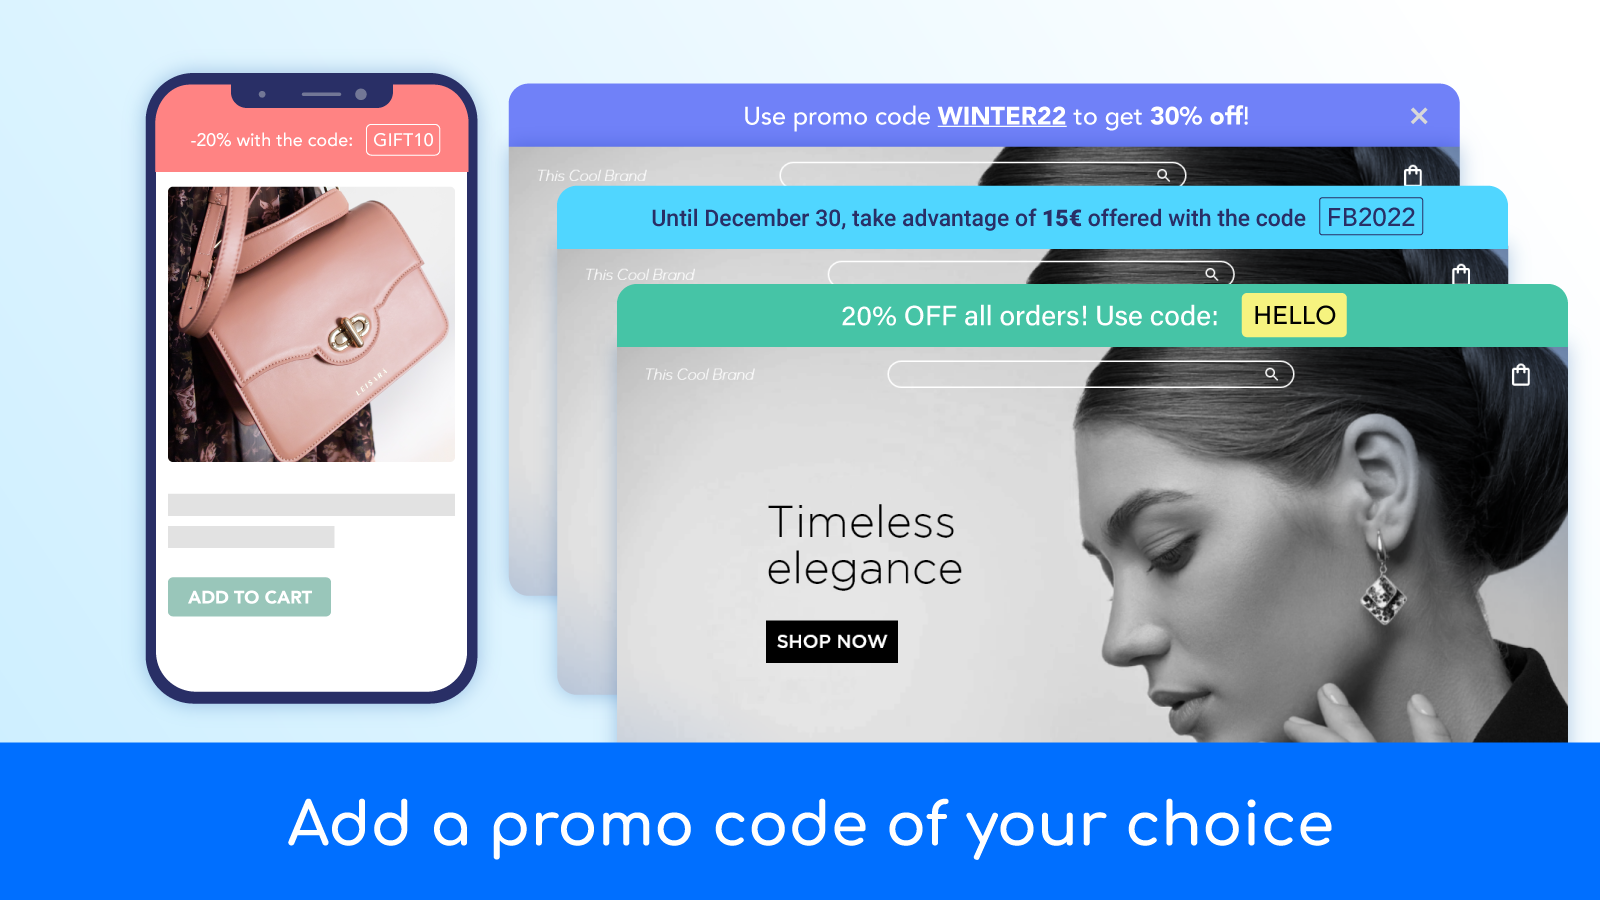 Add a promo code of your choice